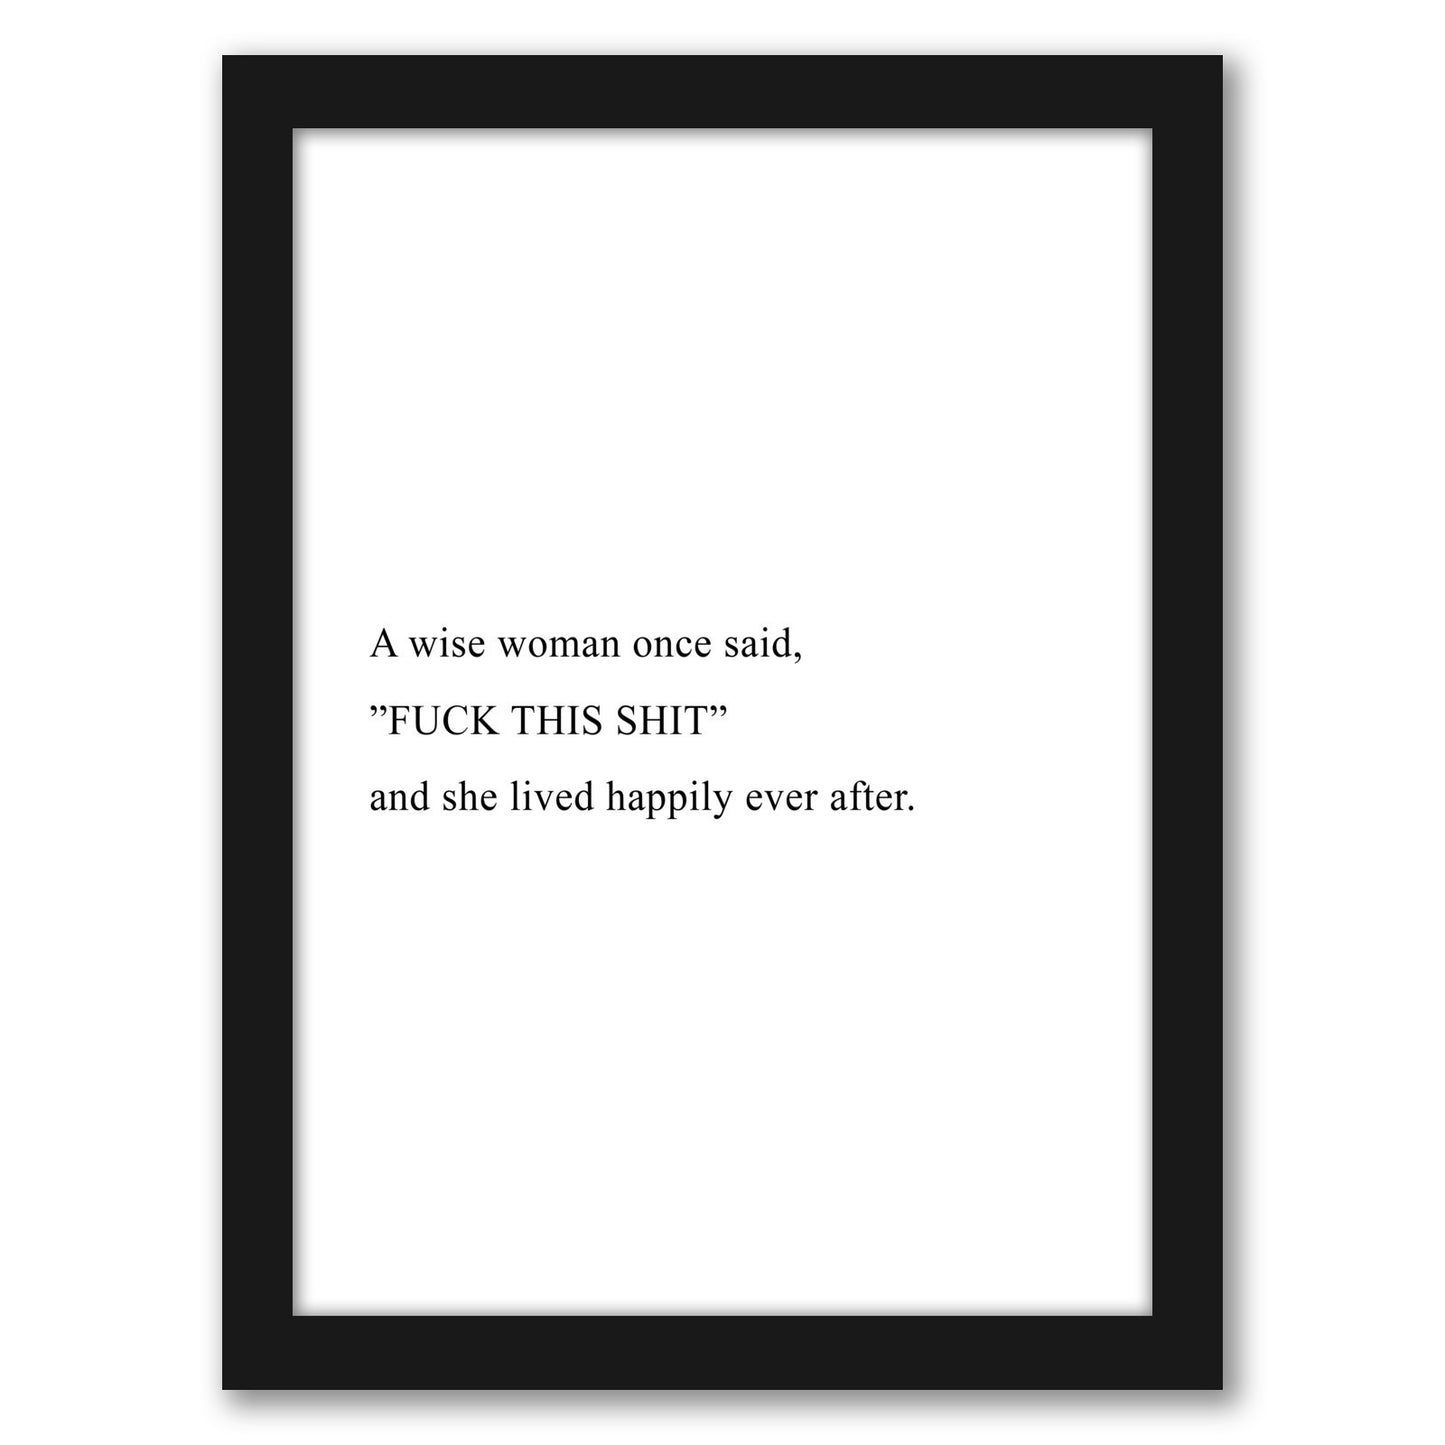 Wise Woman by Explicit Design - Framed Print